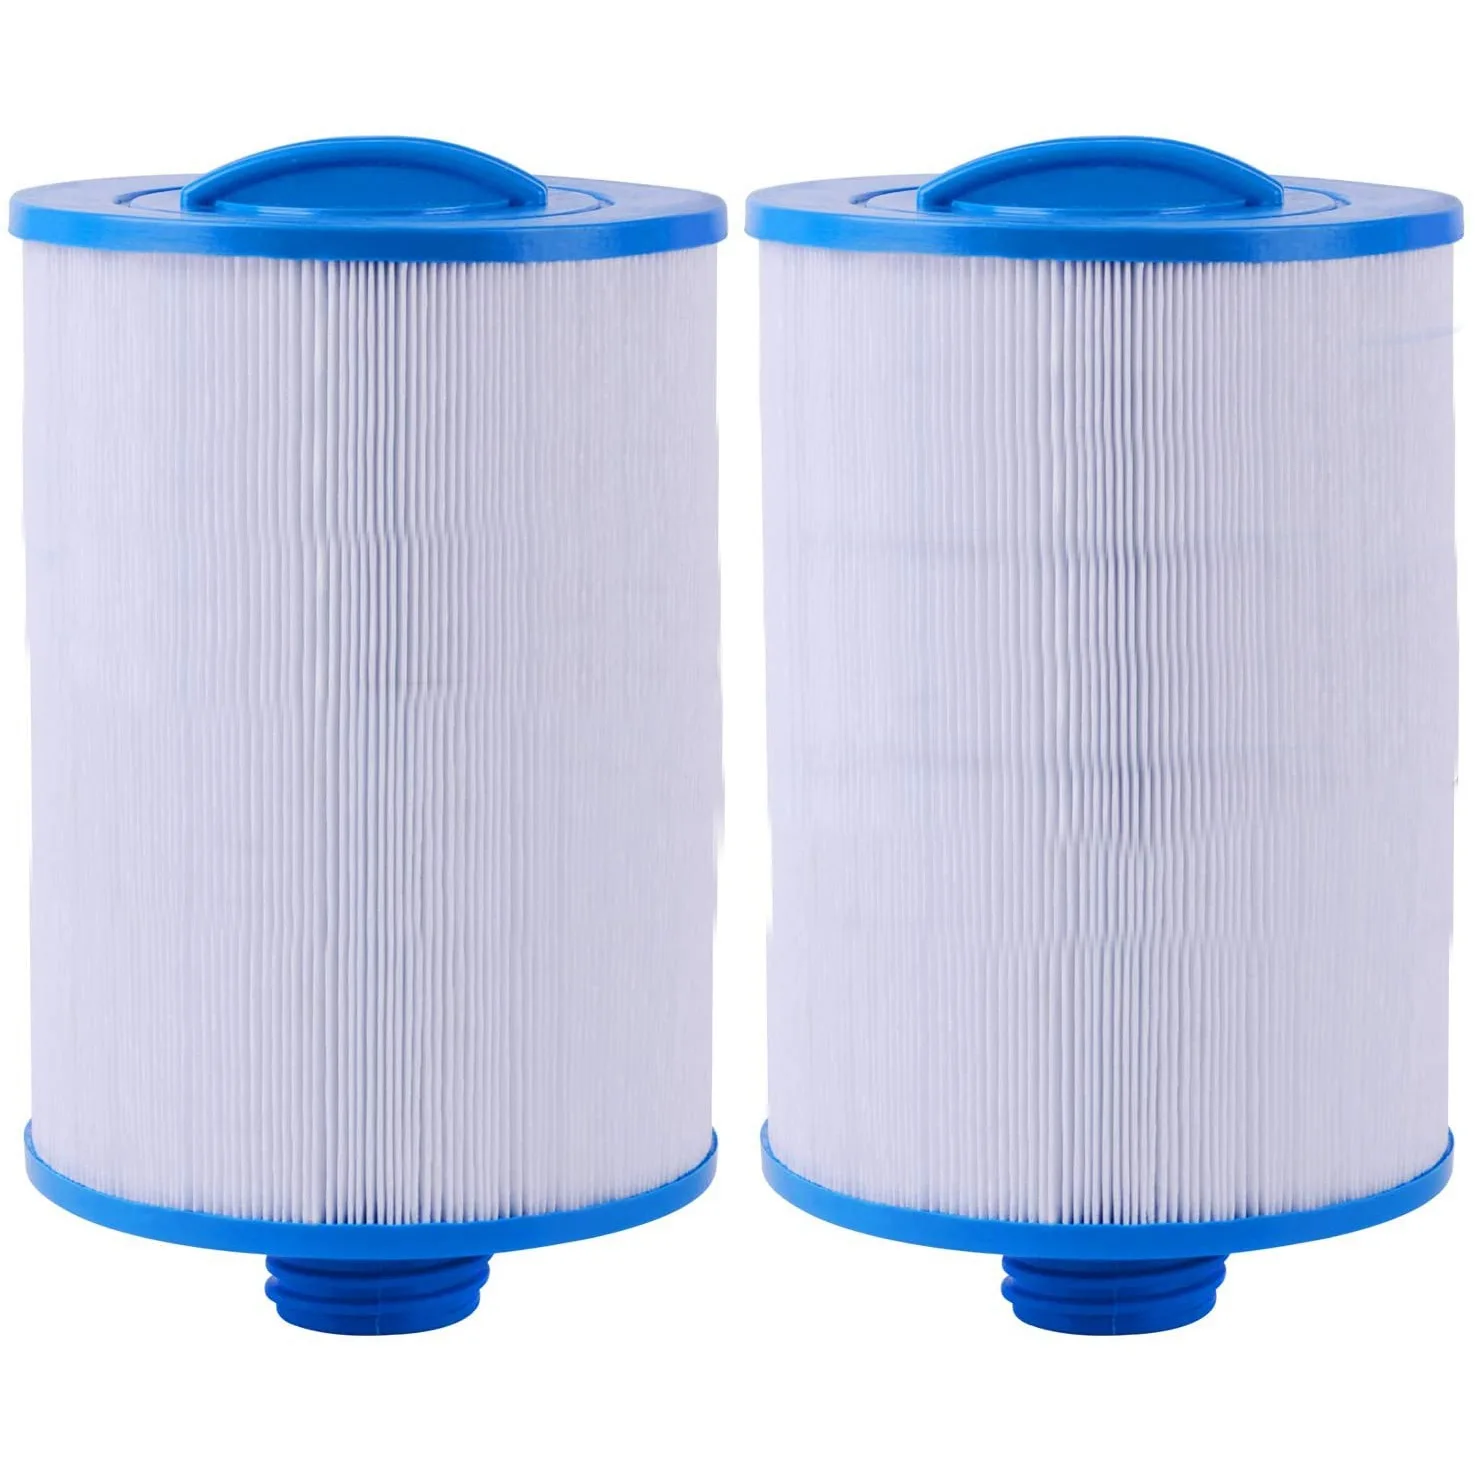 

Replacement for Spa Filter PWW50P3(1 1/2Inch Coarse Thread),Unicel 6CH-940,Filbur FC-0359, Waterway Front Access Skimmer